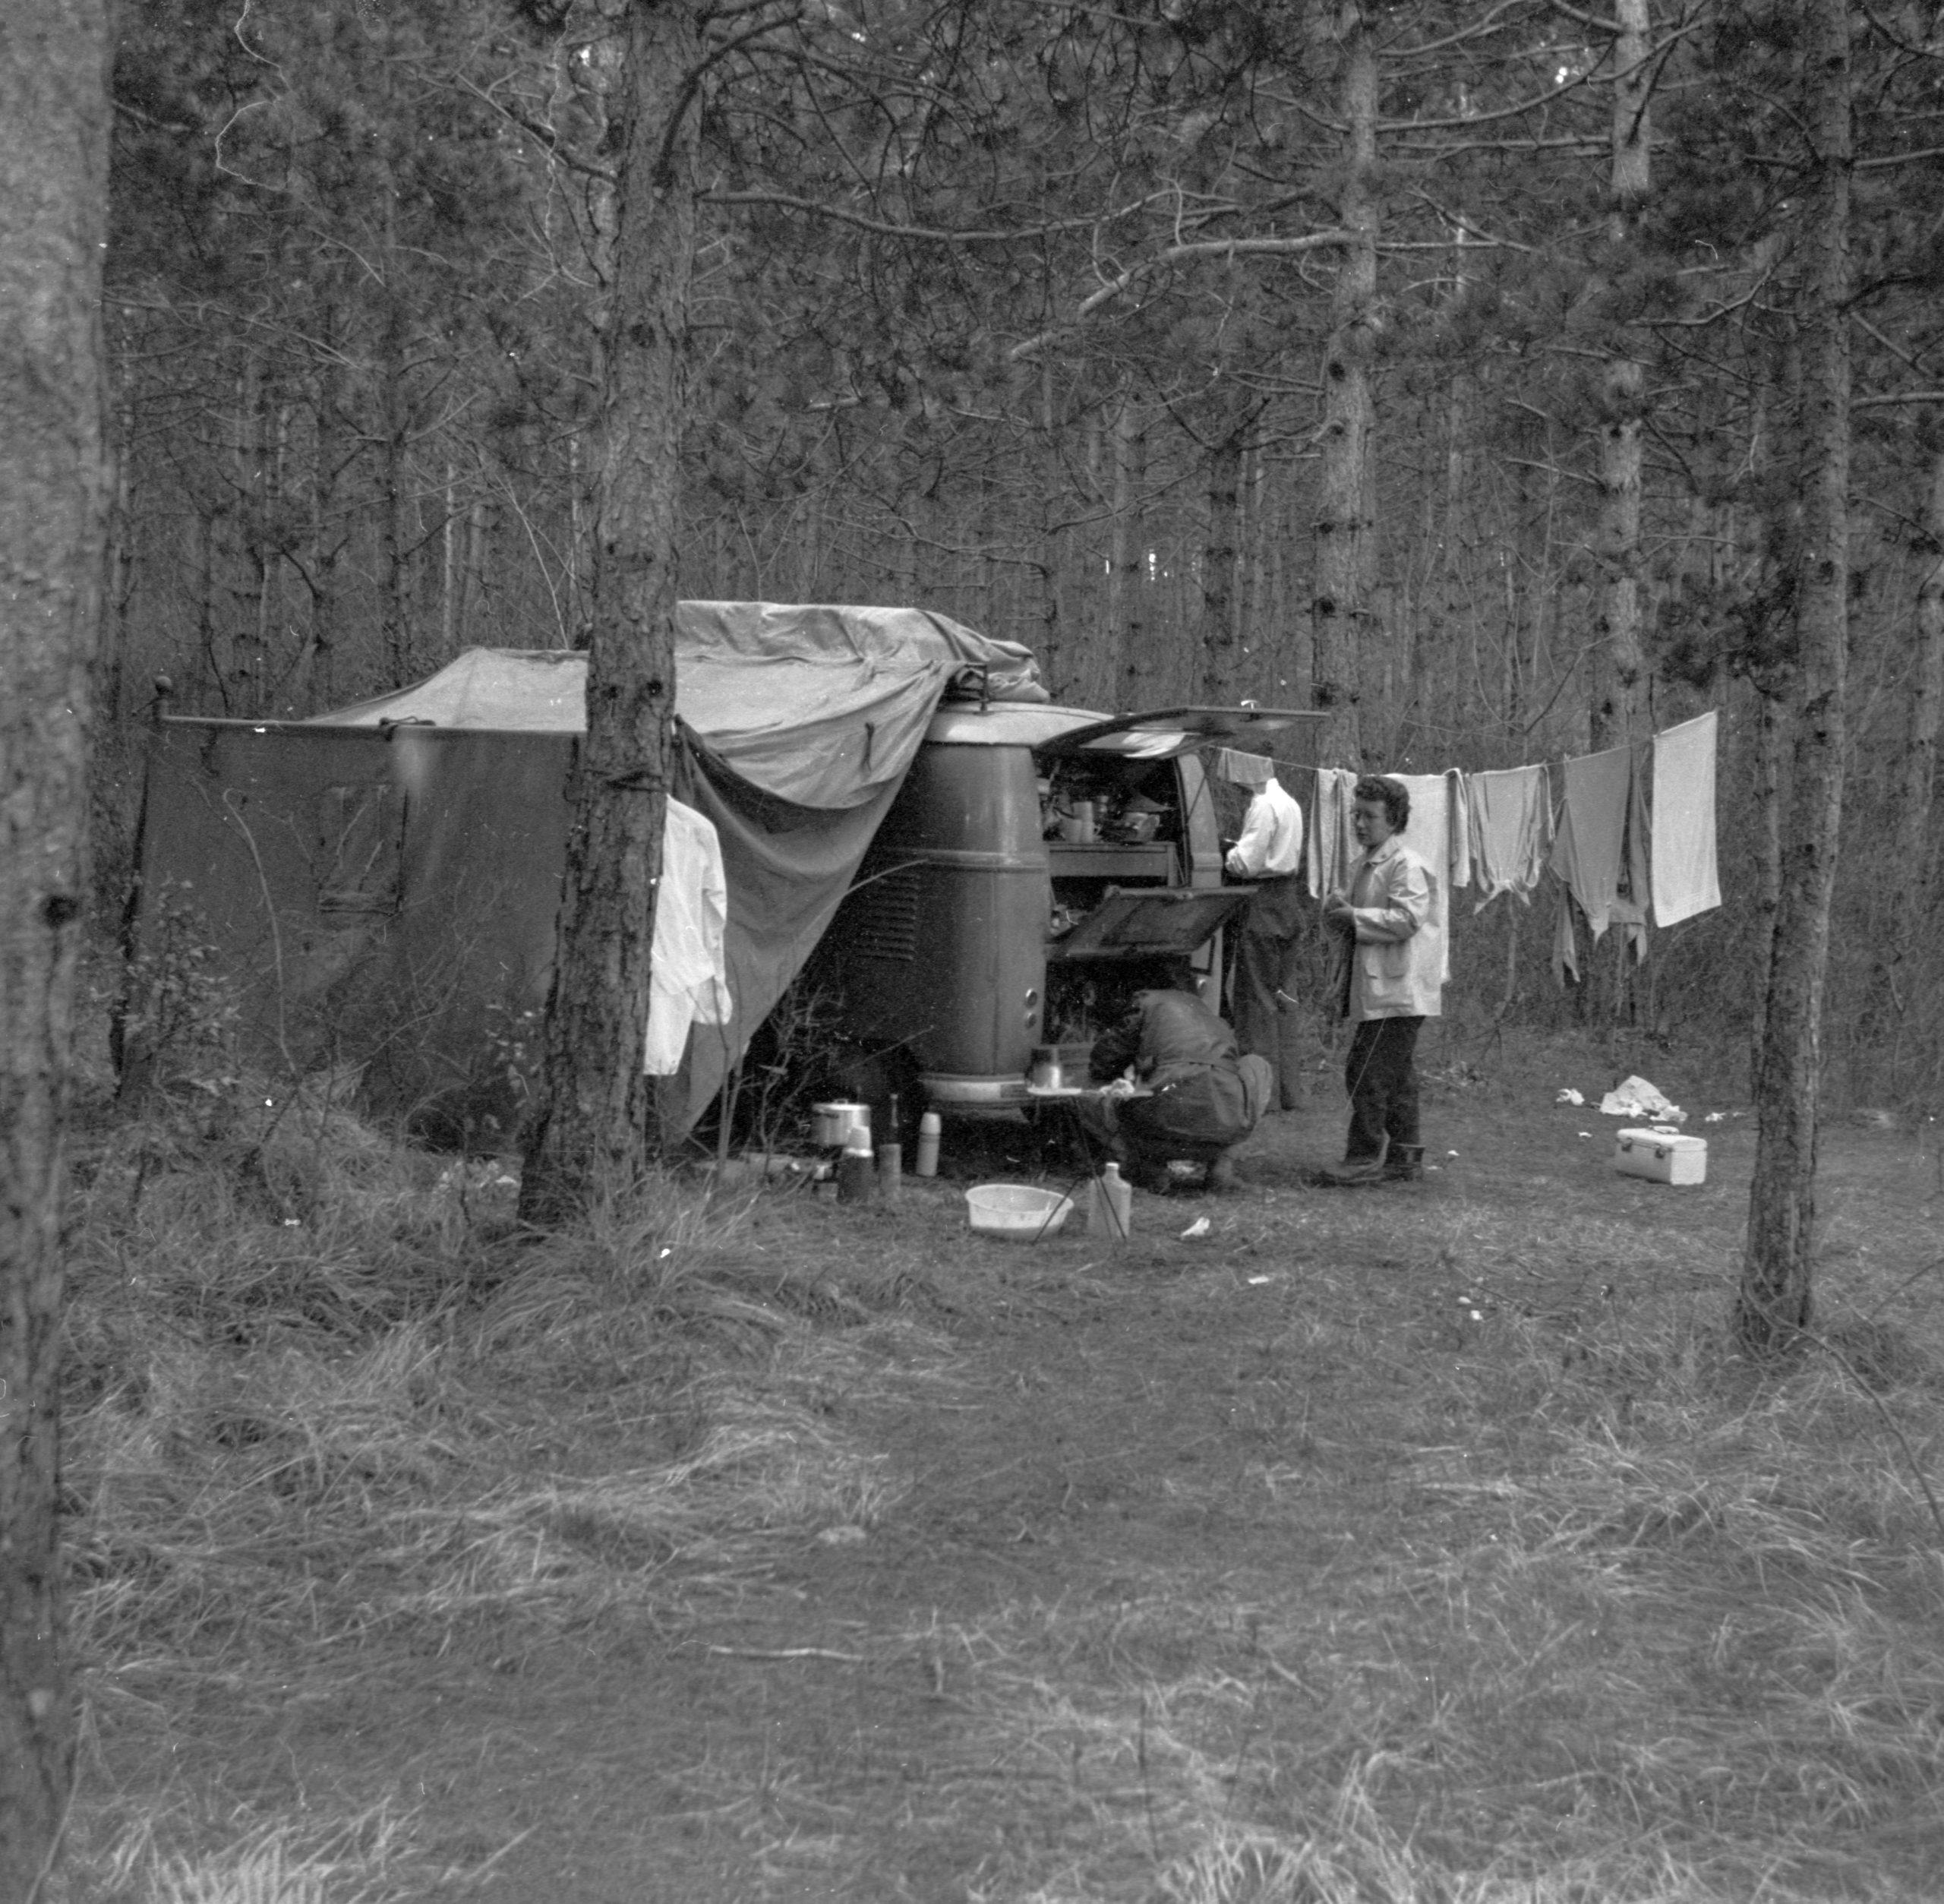 Home is a Journey - April 9 - Trieste Forest campsite